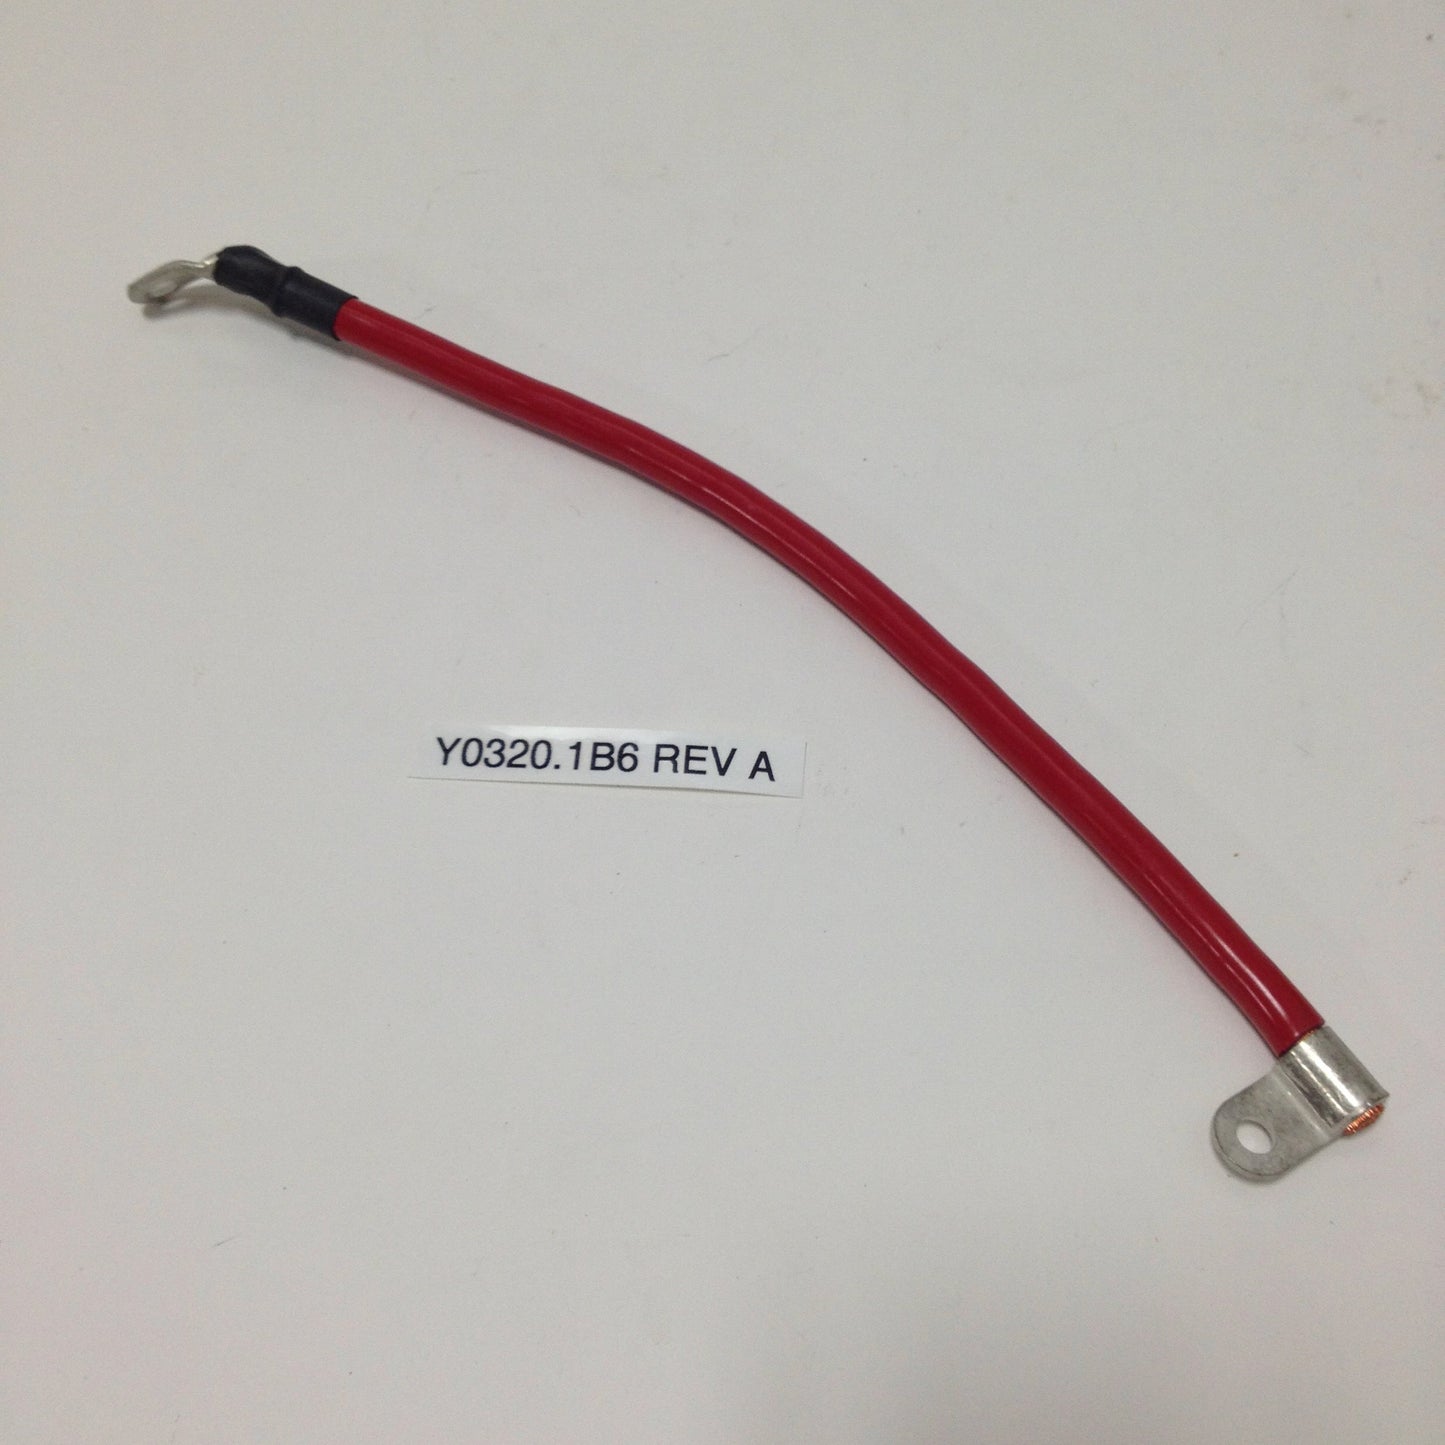 POSITIVE BATTERY CABLE Y0320.1B6 Rev A